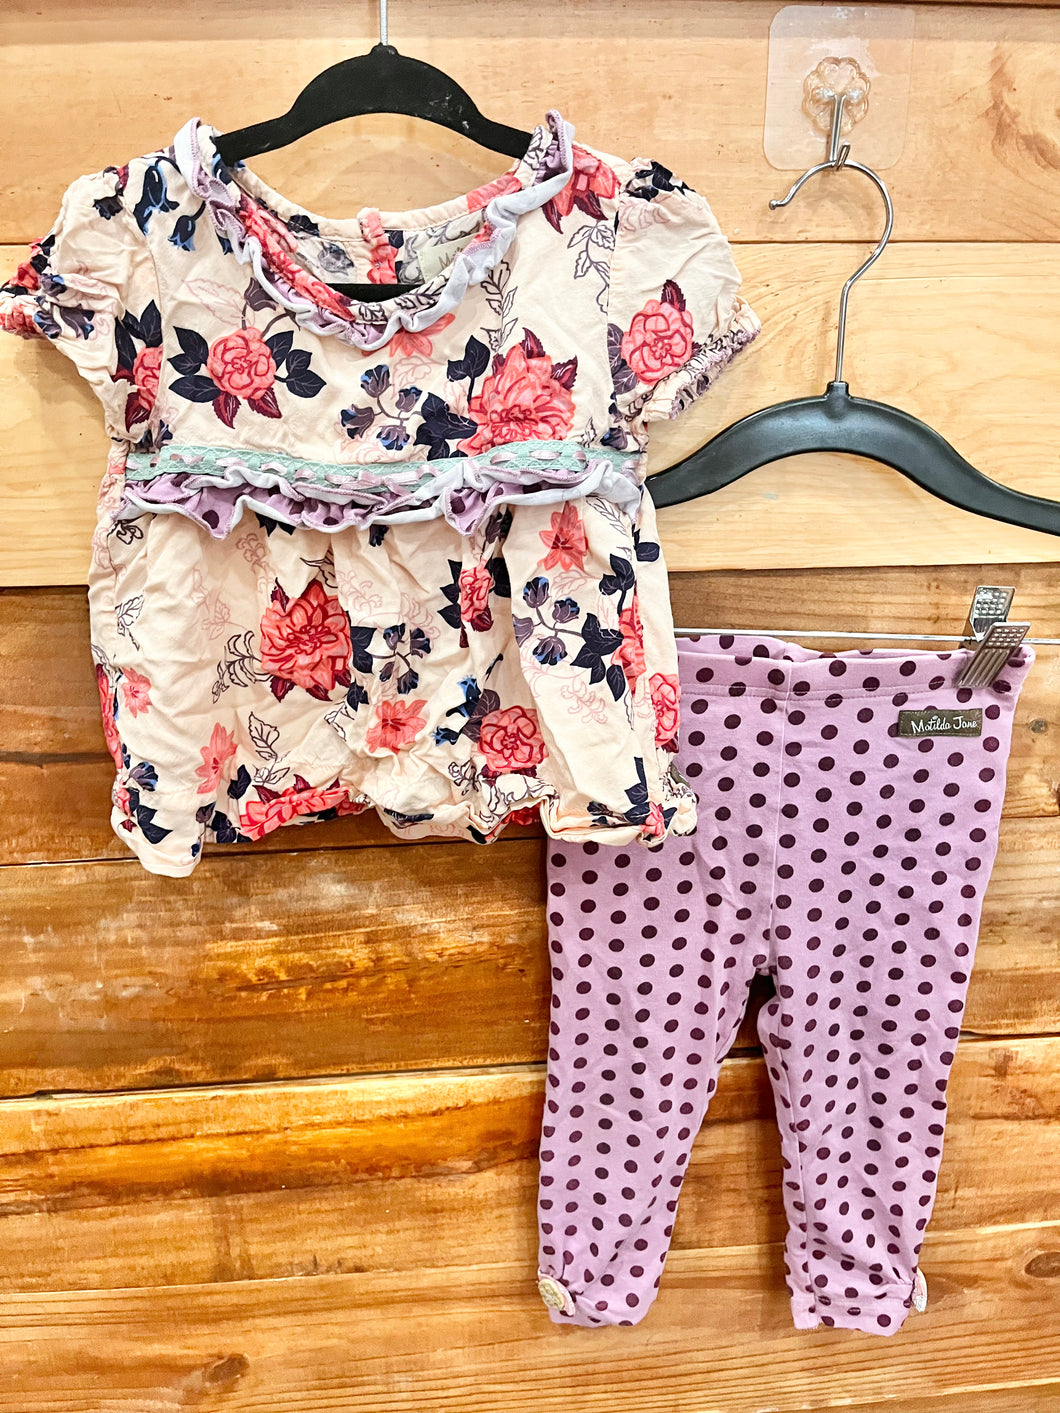 Matilda Jane Polka Dot Roses 2pc Outfit Size 18-24m